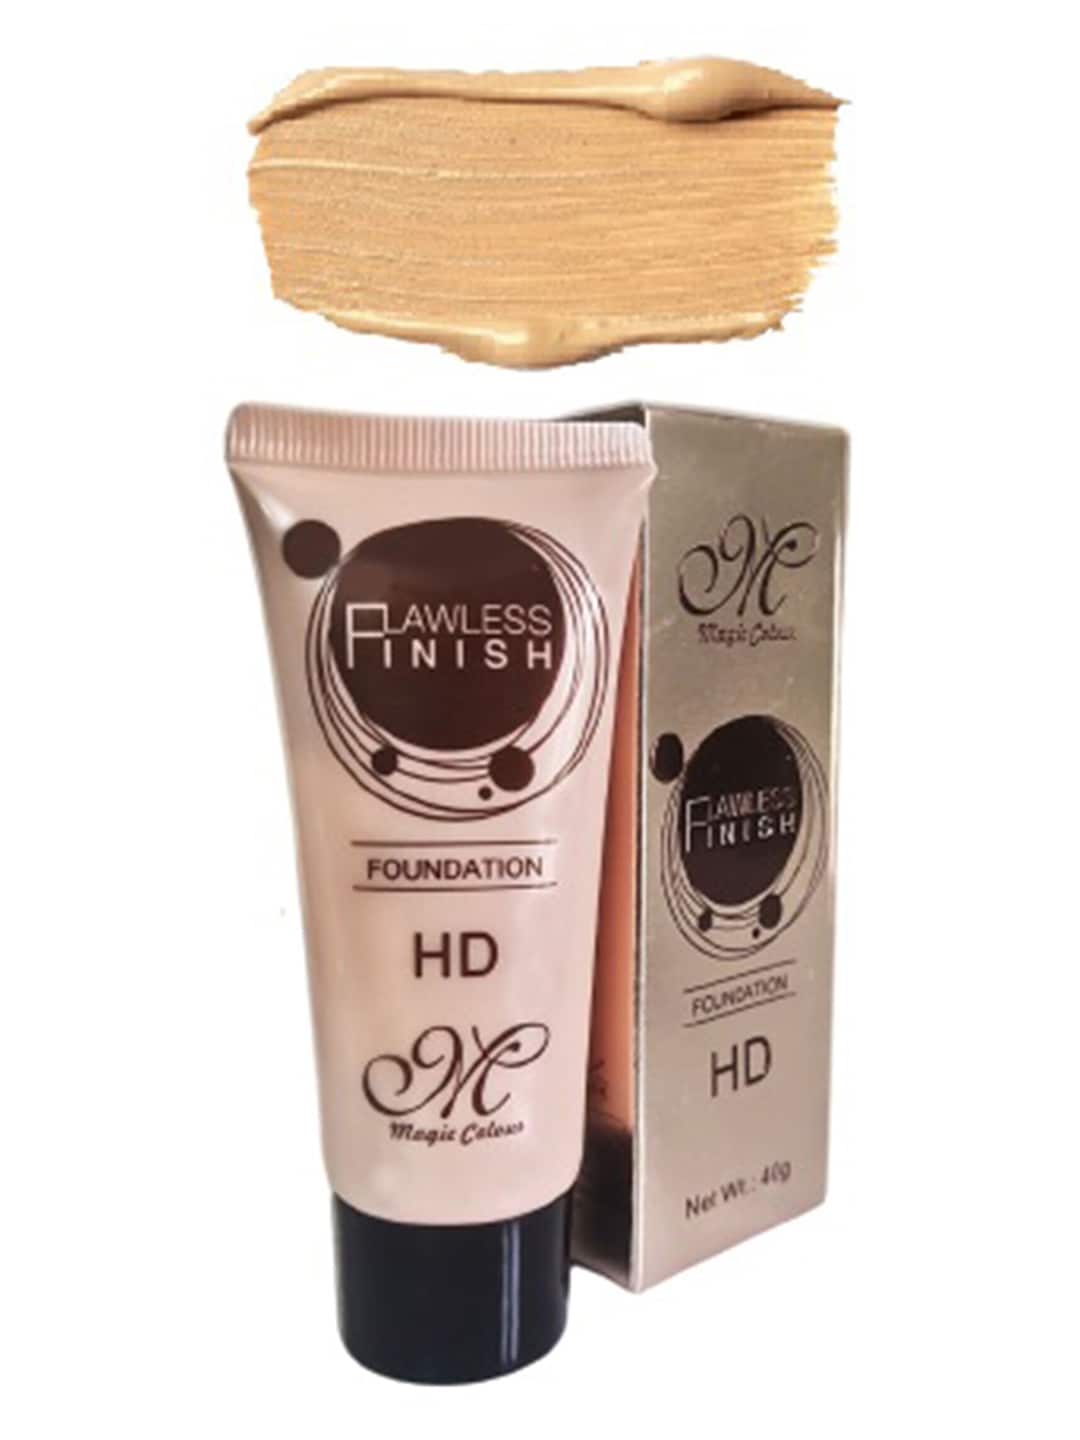 Magic Colour Flawless Finish HD Foundation - SPF 15 - 40 gm - Natural Price in India